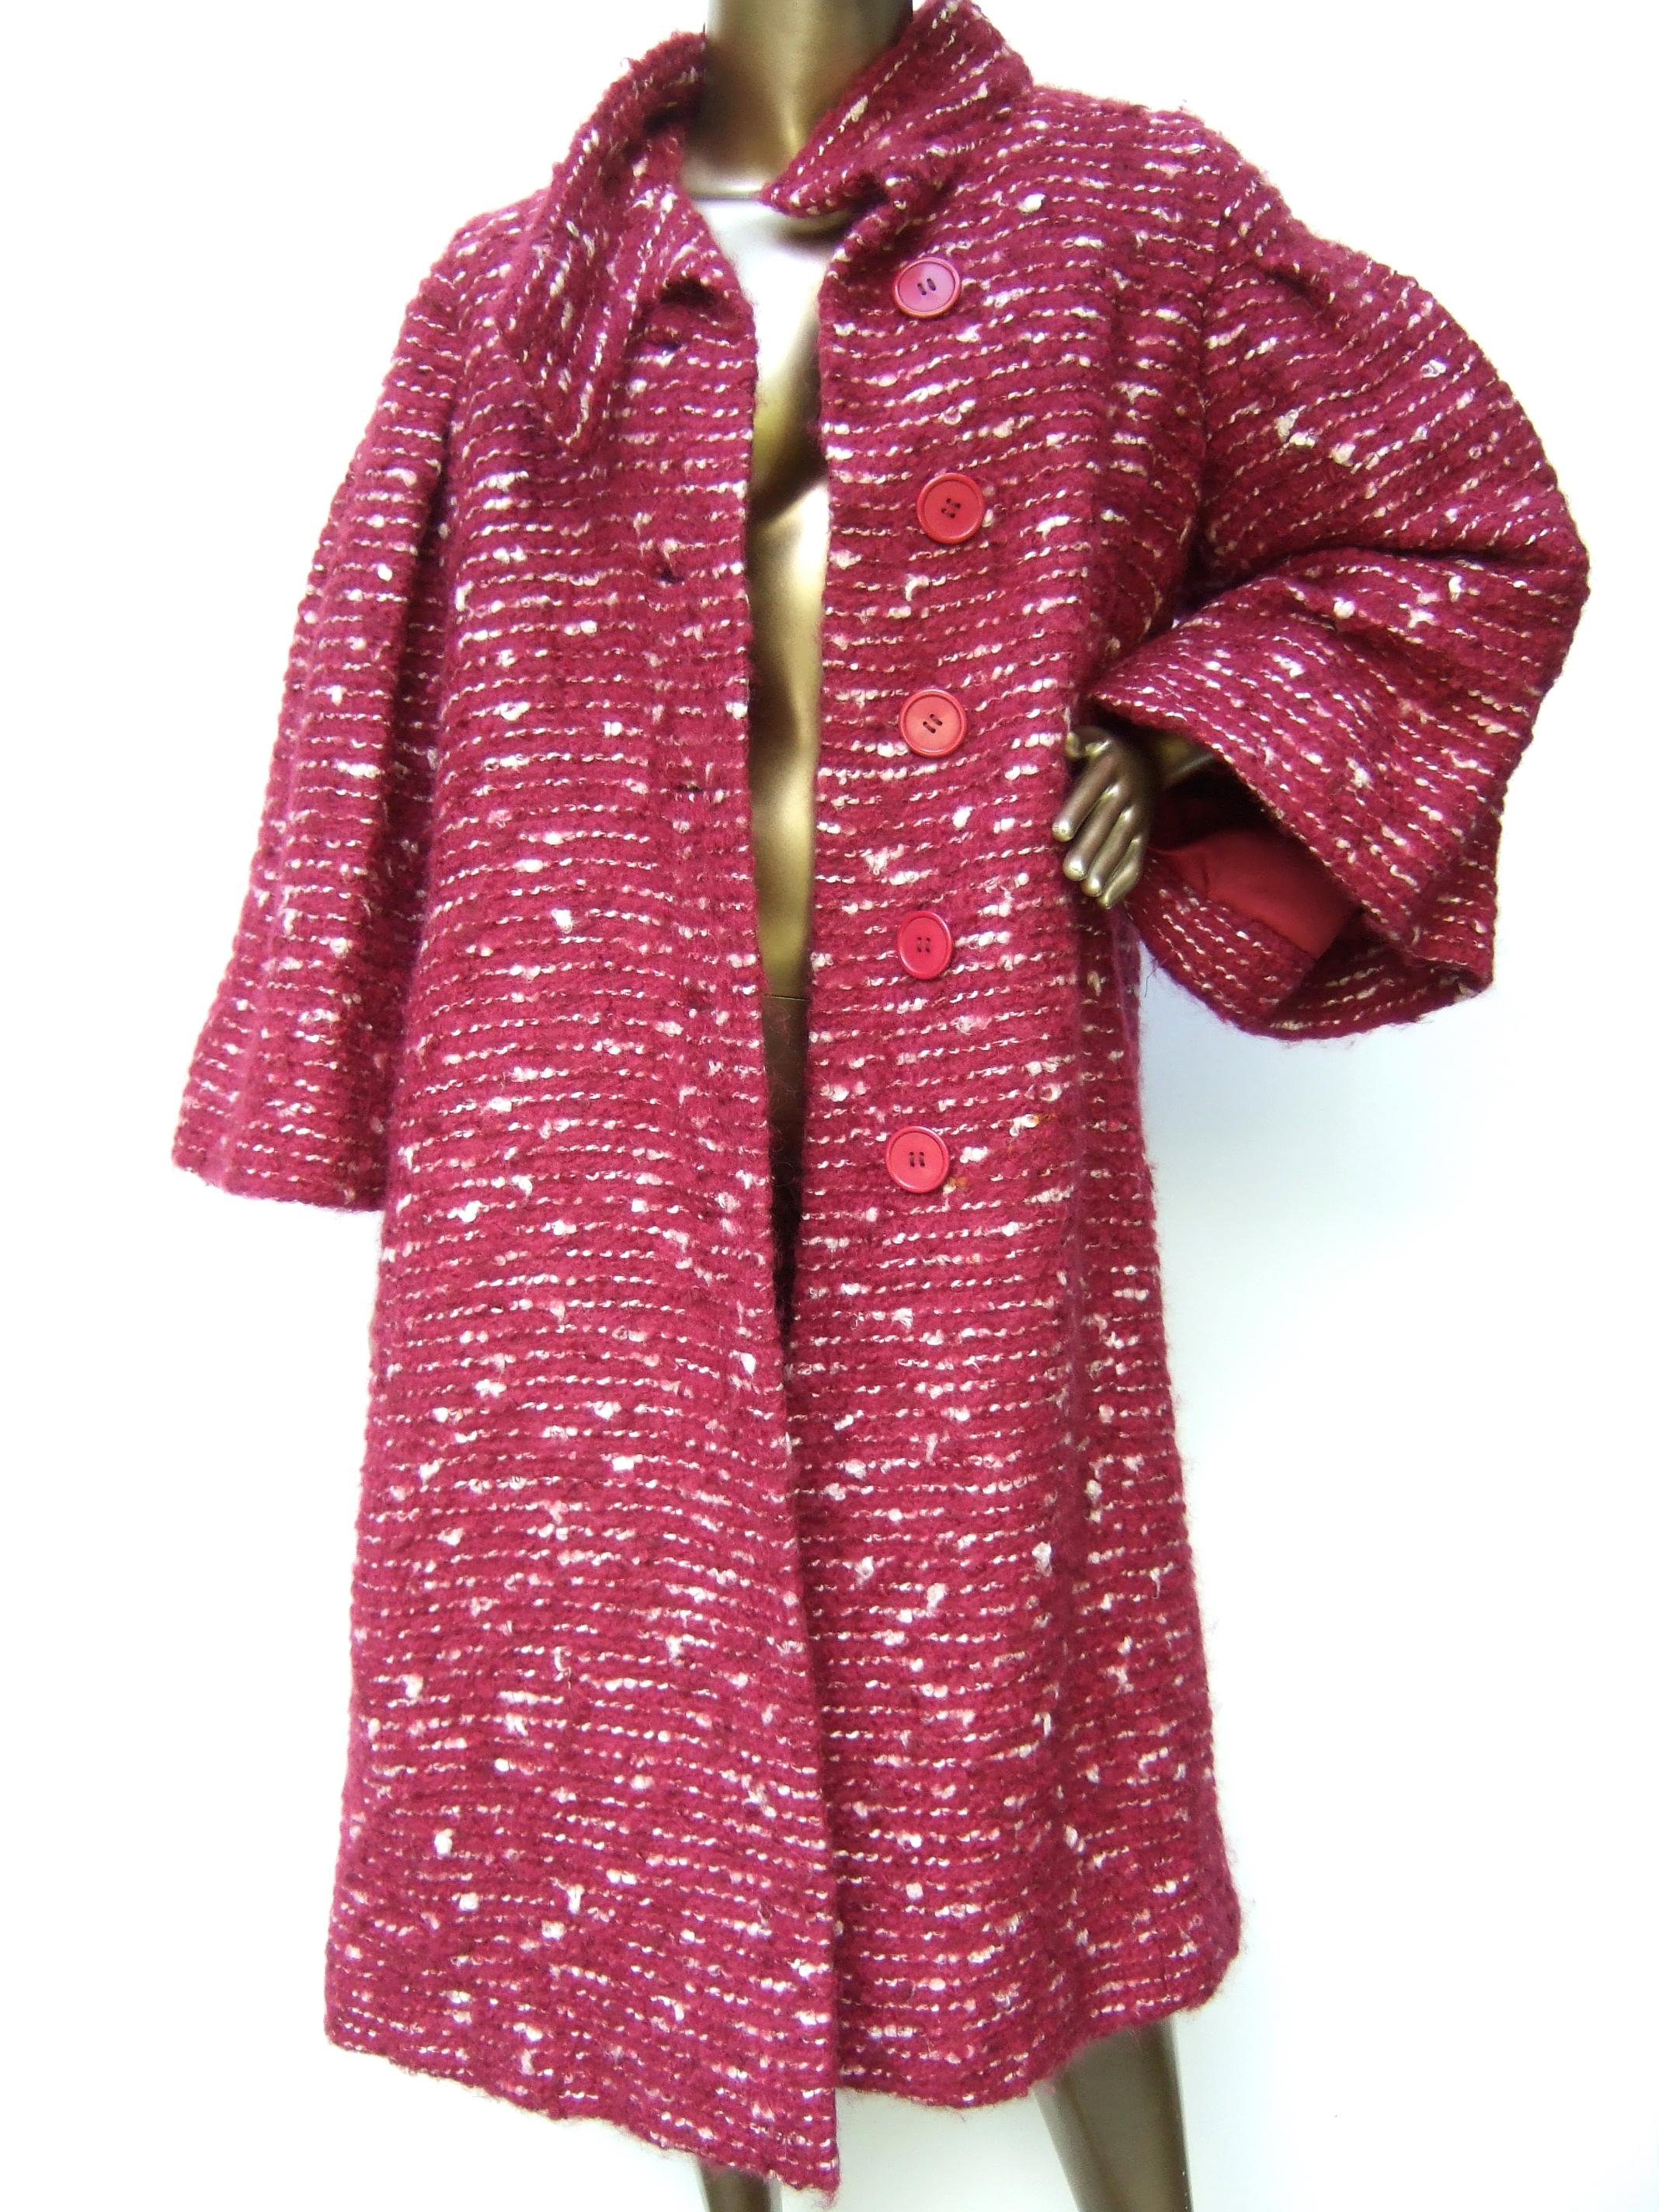 Pauline Trigere Chic Burgundy Chunky Wool Knit Cocoon Coat c 1960  For Sale 9